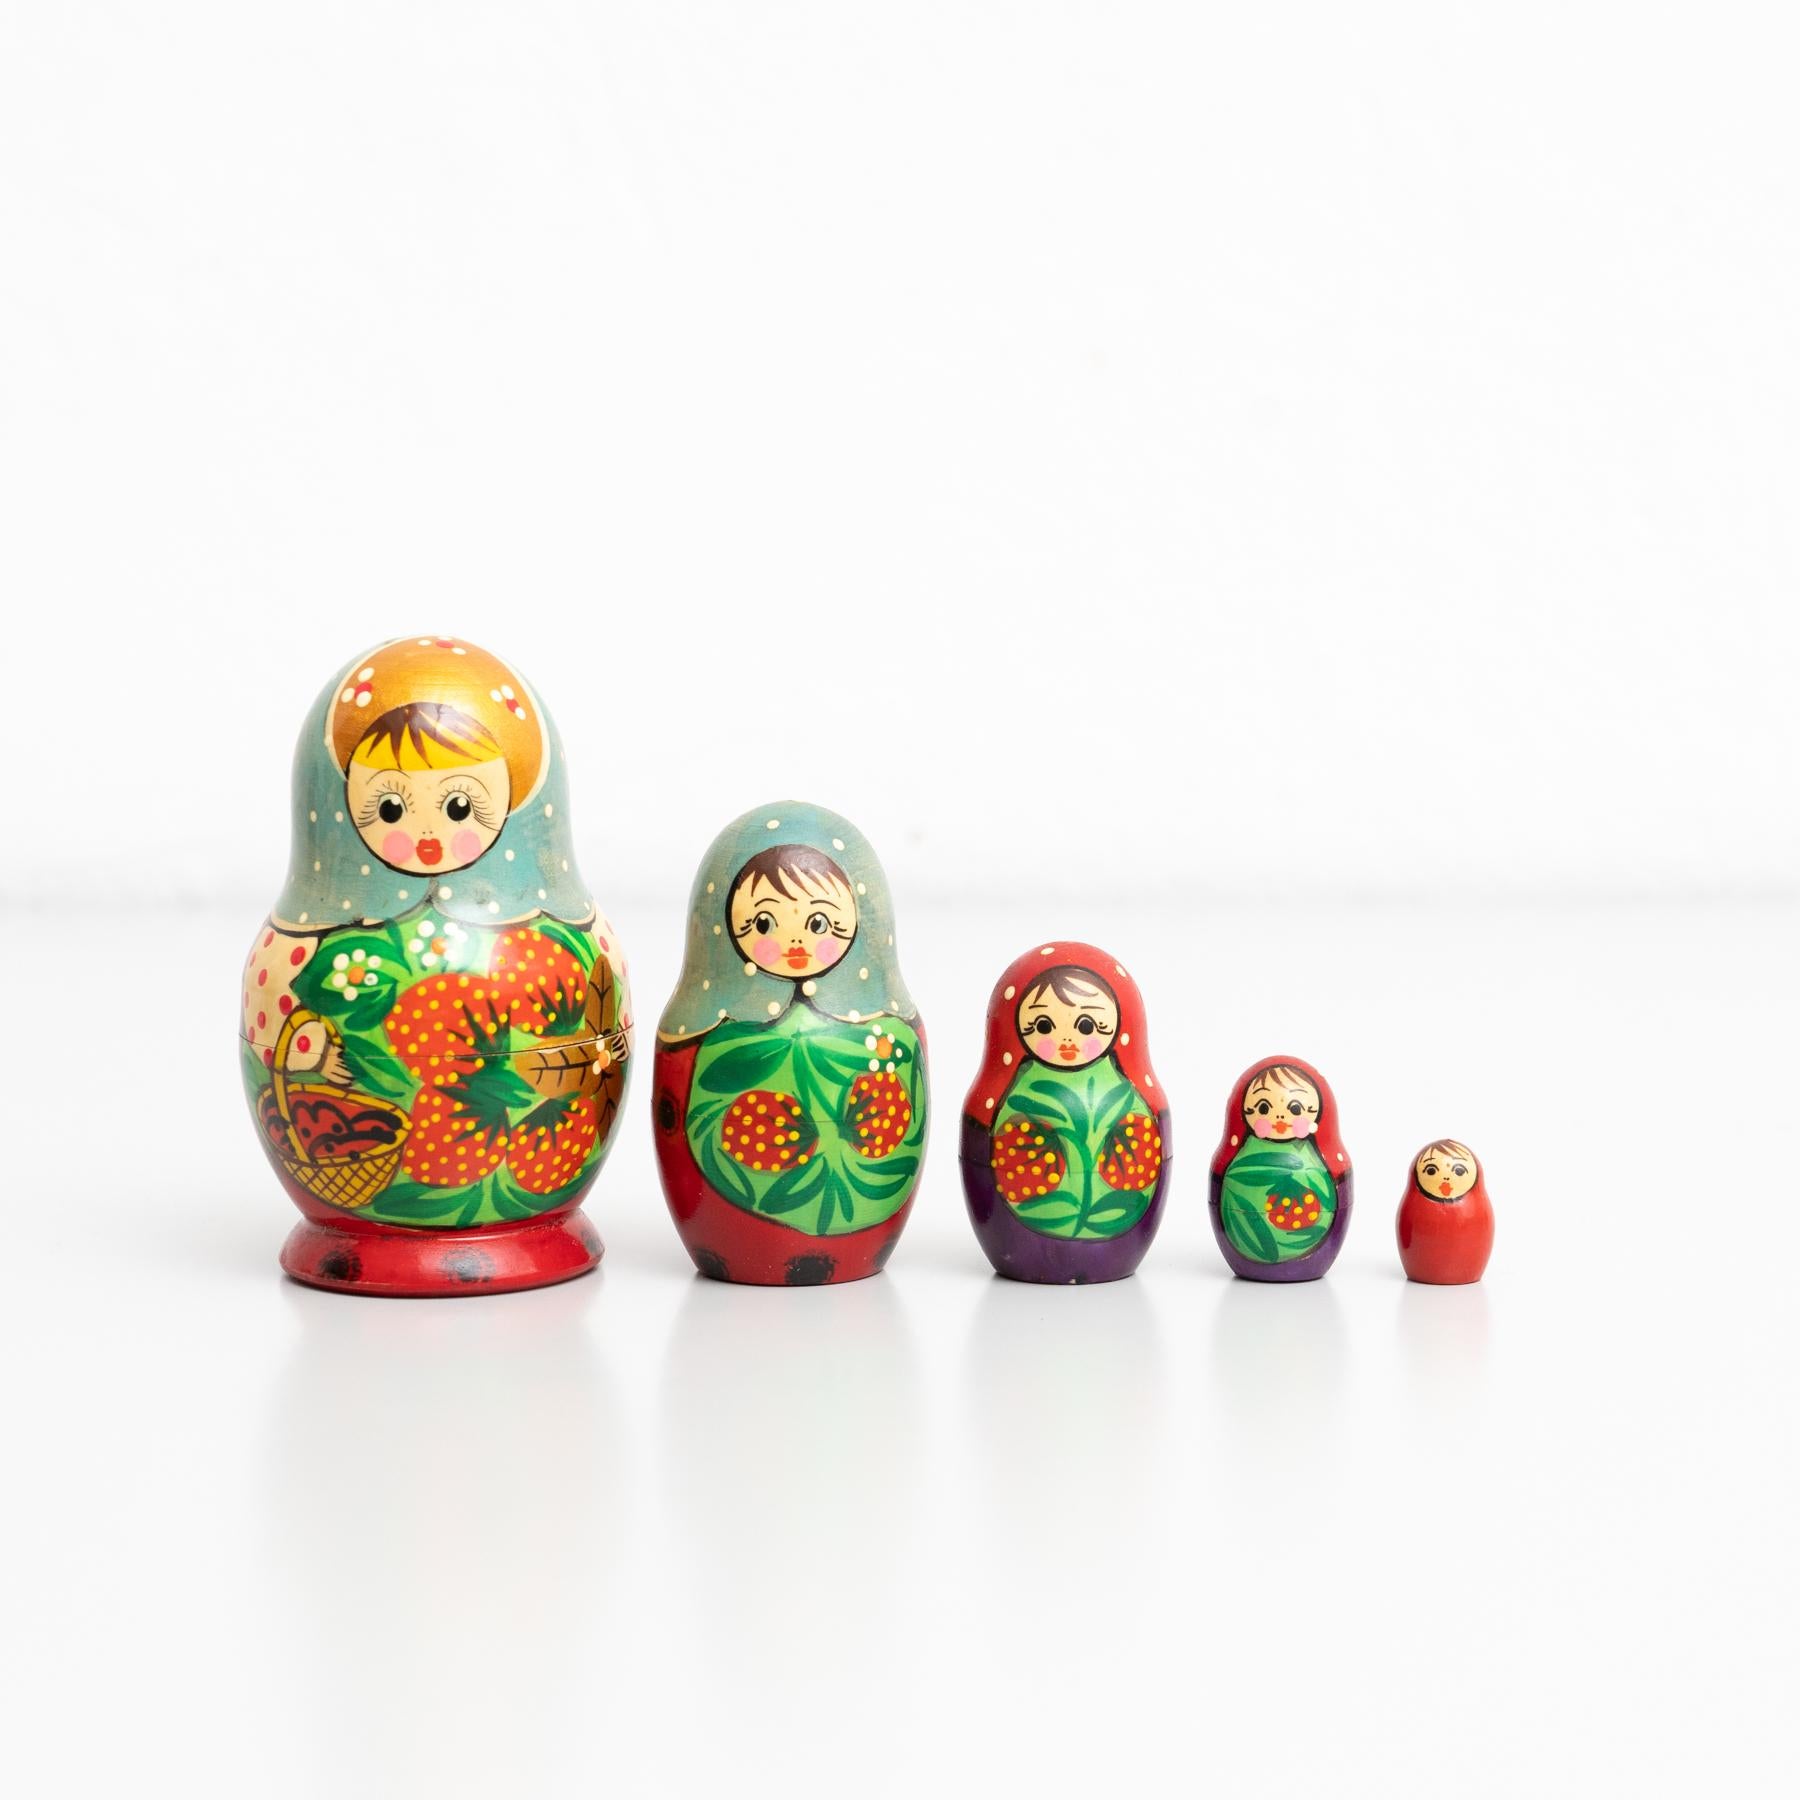 Antique Traditional Hand-Painted Wooden Russian Doll, circa 1960 For Sale 11